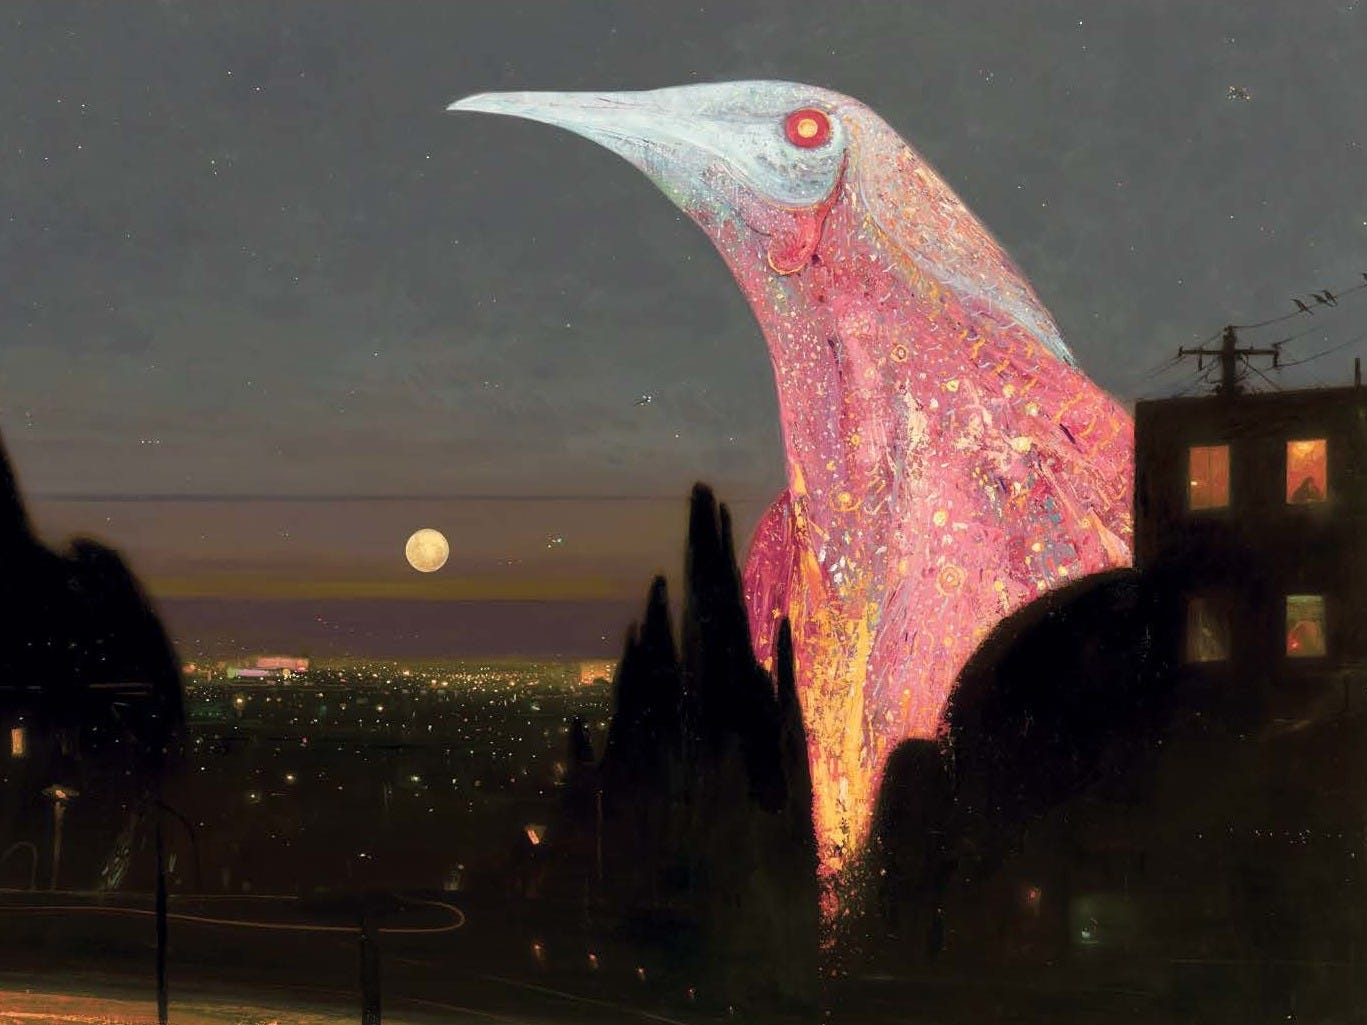 Shaun Tan's new book 'Creature' is a collection of his artwork and essays :  NPR